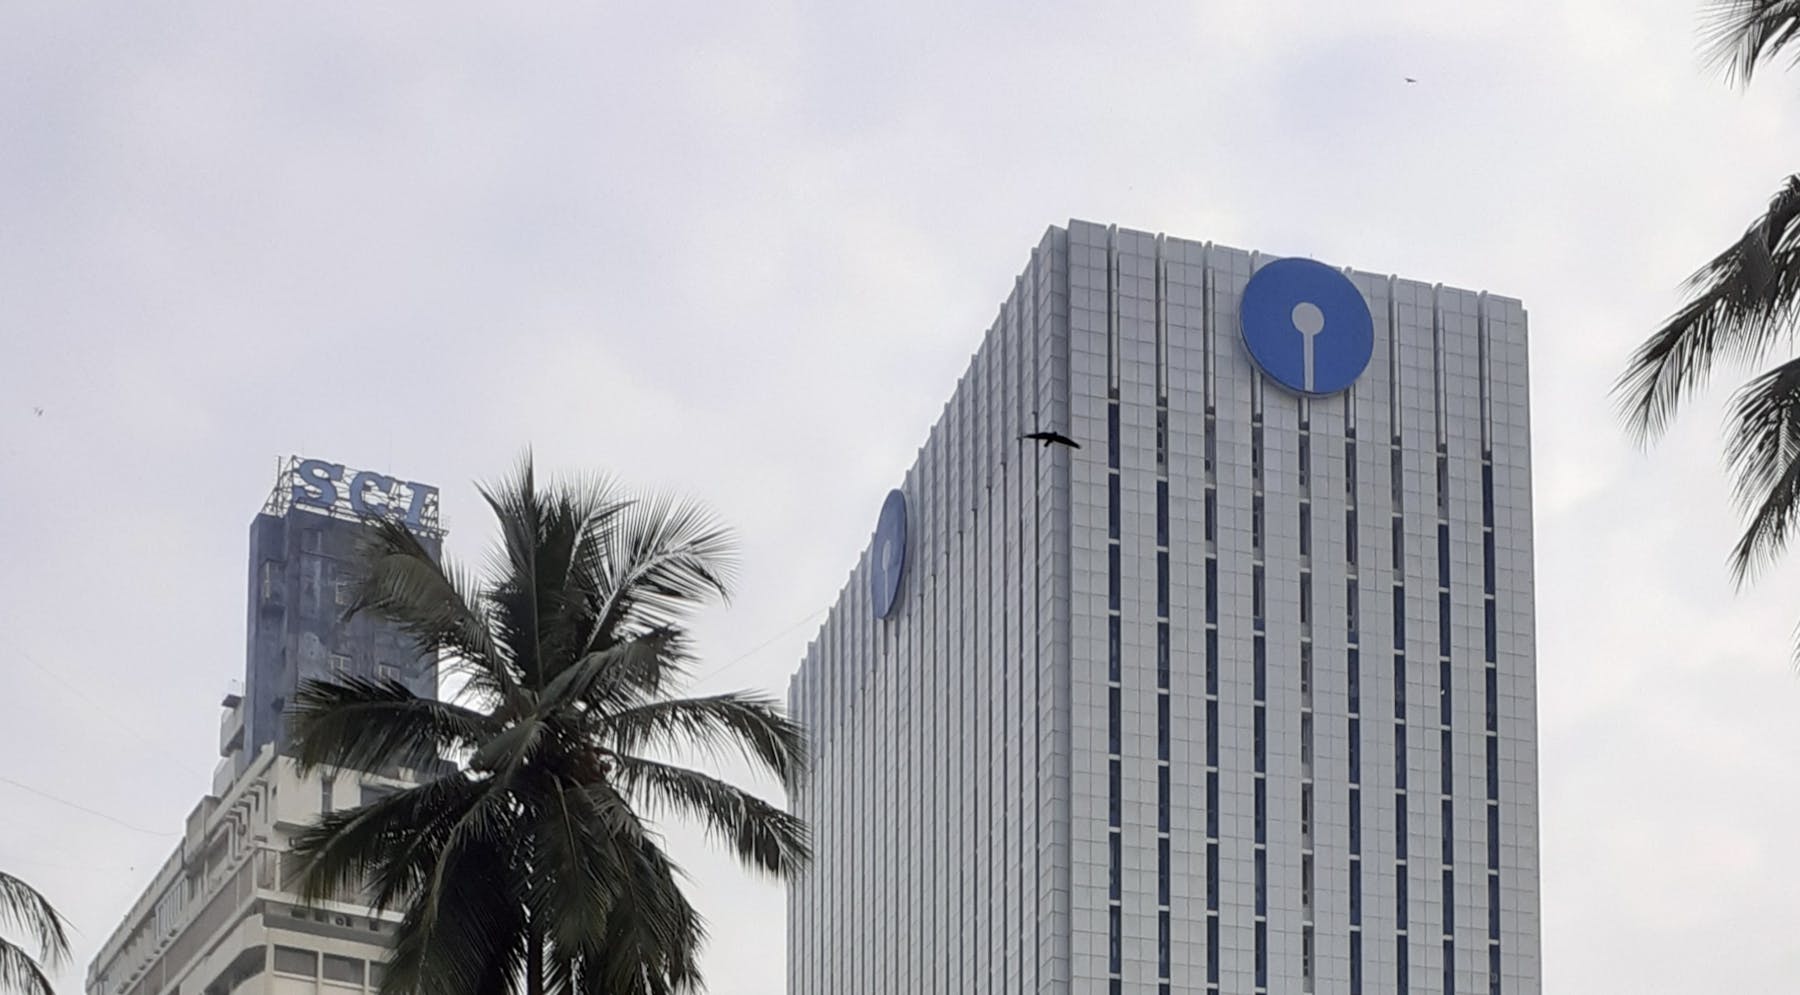 The headquarters of State Bank of India, Corporate Centre, Mumbai